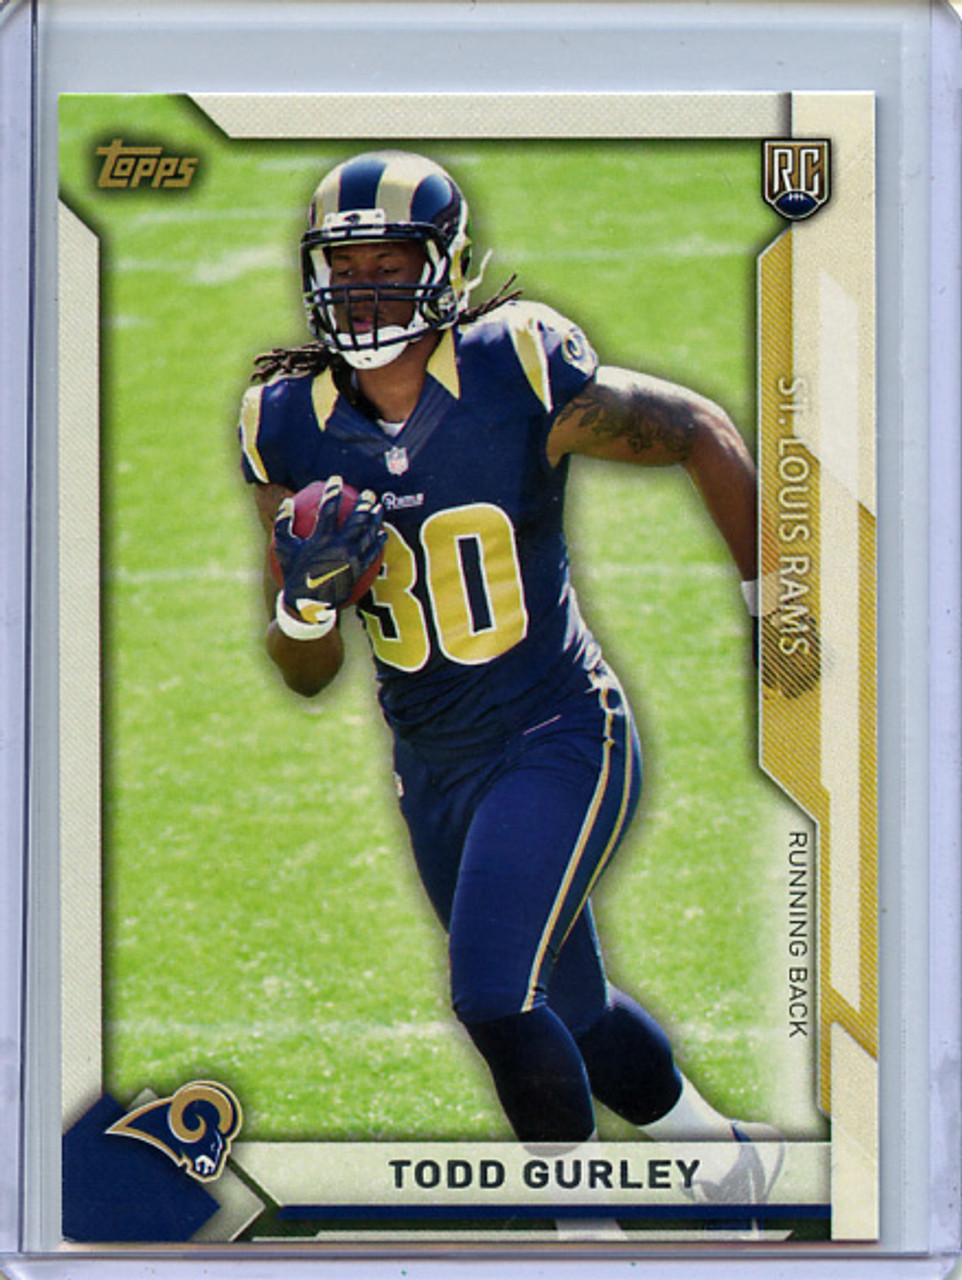 Todd Gurley 2015 Topps, Take it to the House #20